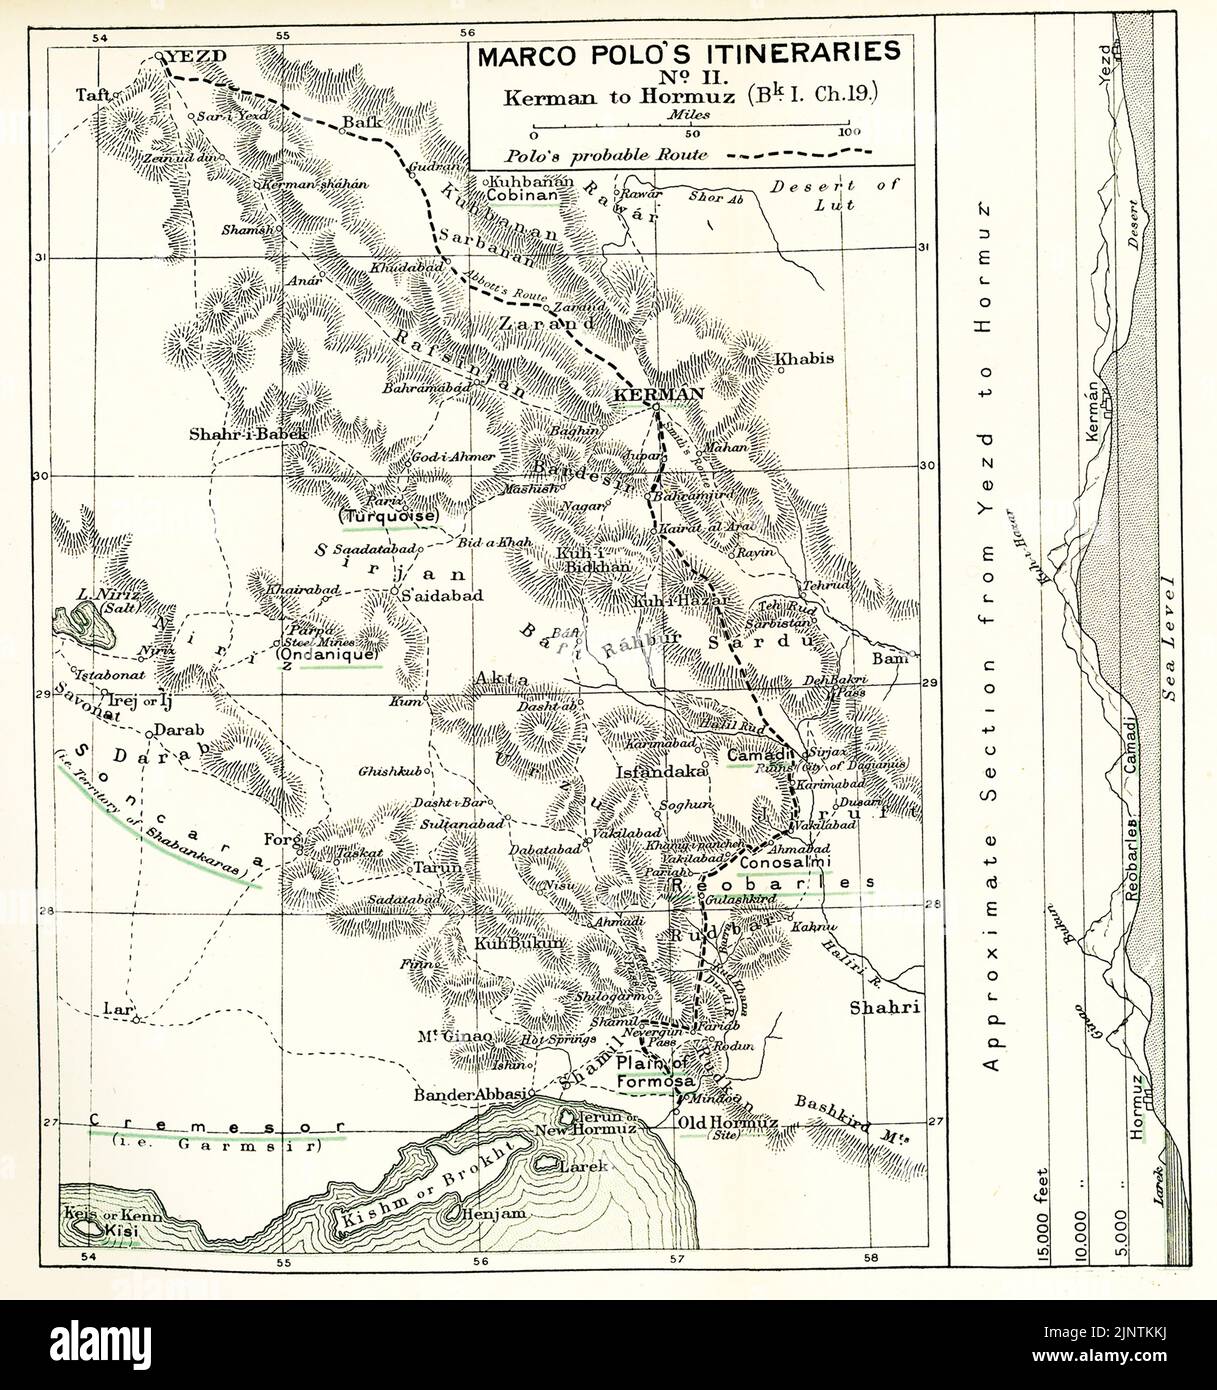 The caption for this map from The Travels of Marco Polo Vol I  as translated by Henry Yule reads: “Marco Polo’s Itineraries  No II  Kerman to Hormuz Bk I Ch 19.” Polo’s possible route is marked by dotted line. Marco Polo was a Venetian traveler who left Venice, Italy, with his father Niccolo and uncle Maffeo in 1271. He arrived in China in 1275 where Kublai Khan had his court, and returned home in 1294.  Note that the city of Kinsai, the so-called 'Heavenly City,' was called by Marco Polo Coromoran. Kanbaliq is Turkic for what is today Beijing. Polo called it Cambaluc. Siam is present-day Camb Stock Photo